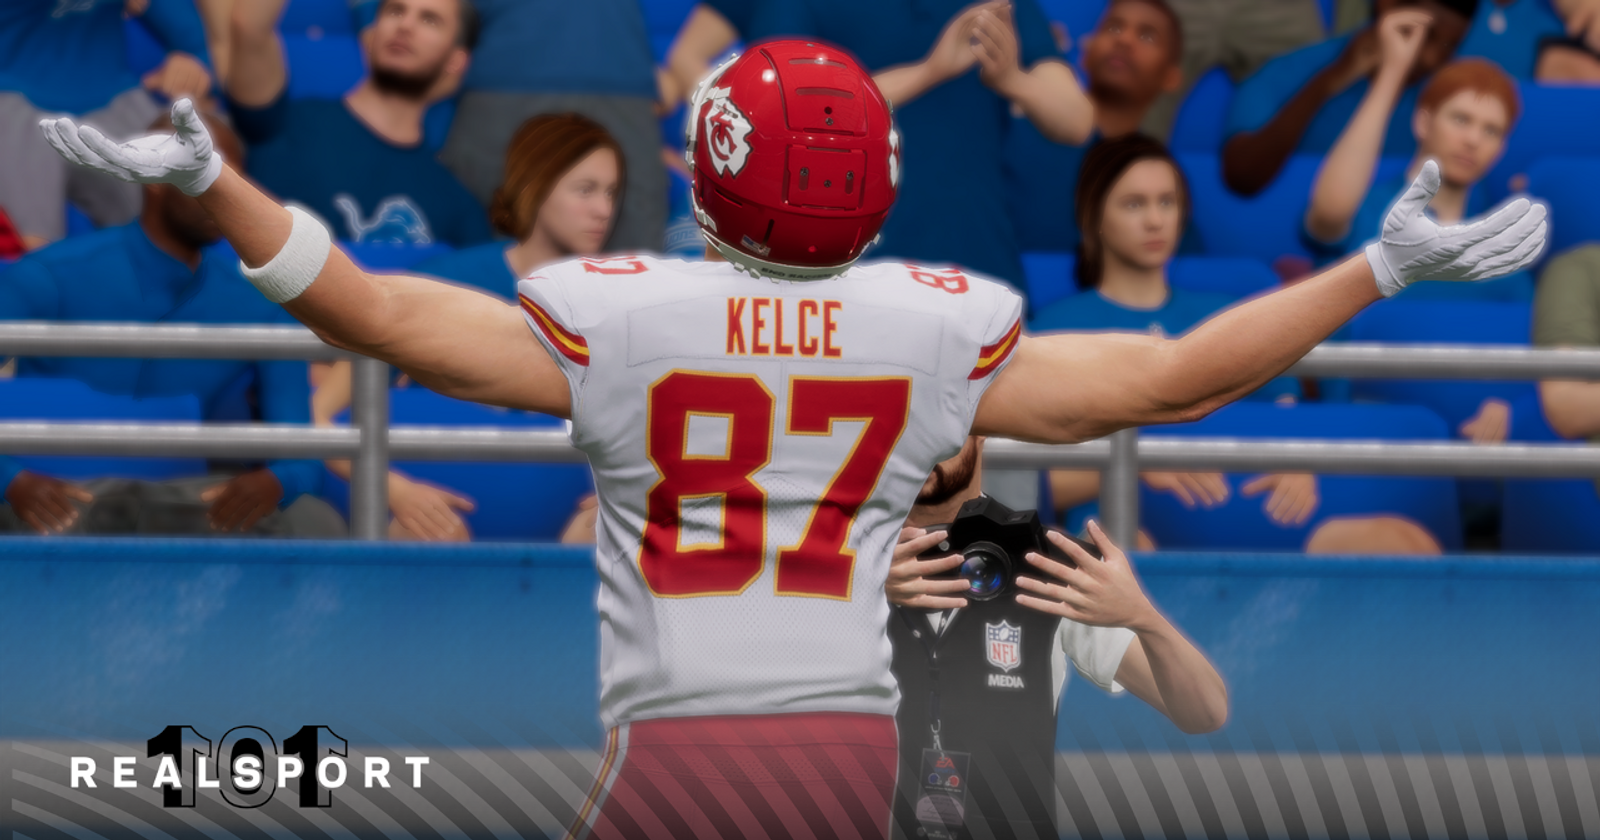 Madden 23 Rosters And Ratings For All 32 Teams - GameSpot